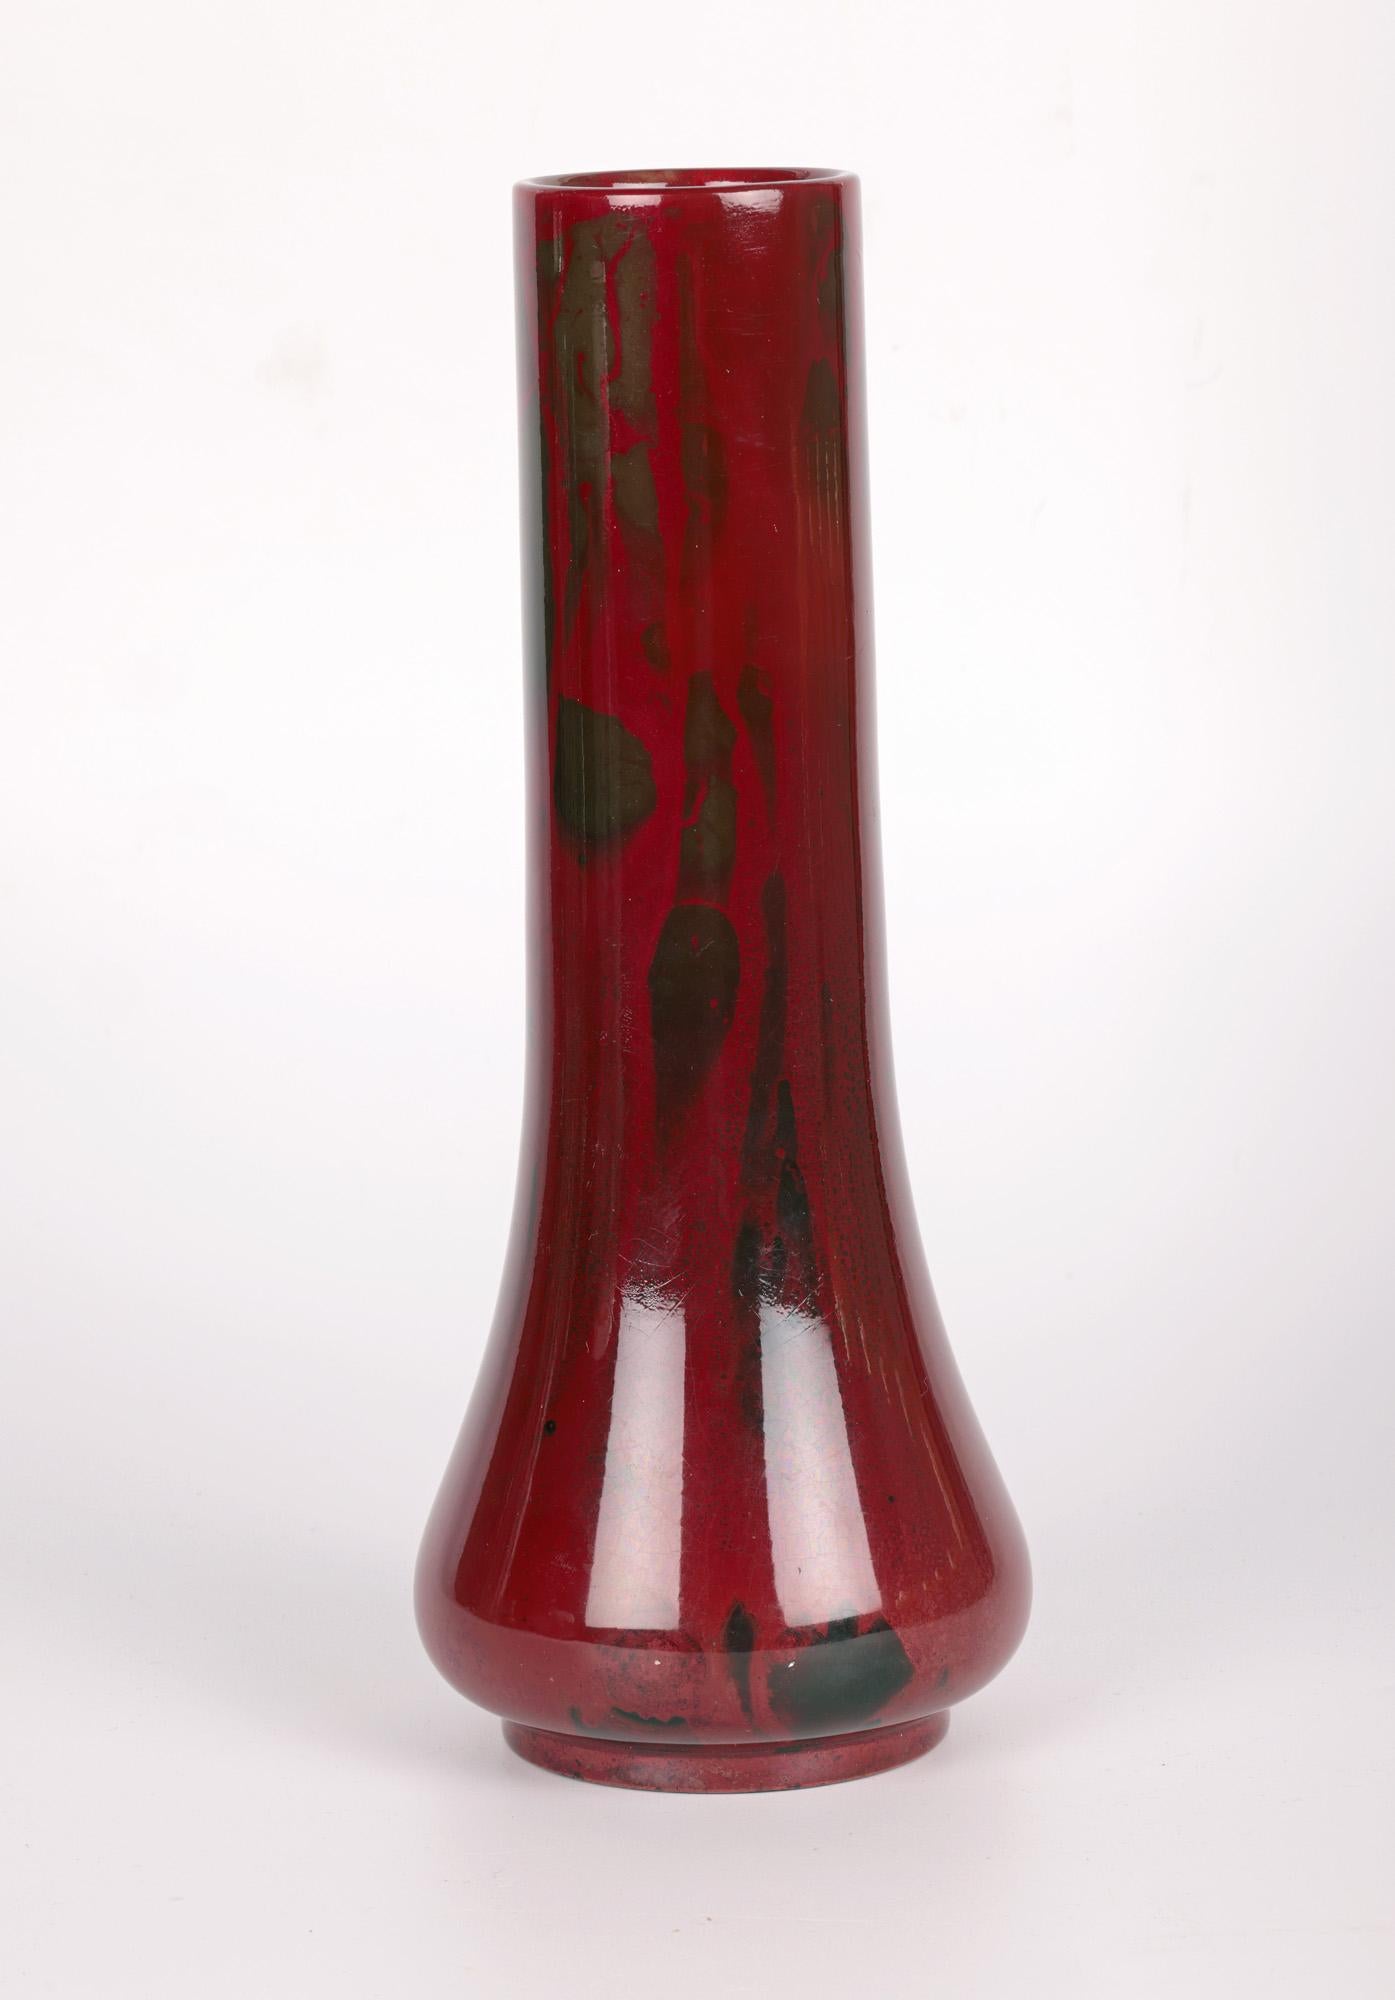 Howsons Art Nouveau Pottery Flambe Vase by Edward Wilks Dated 1912 In Good Condition For Sale In Bishop's Stortford, Hertfordshire